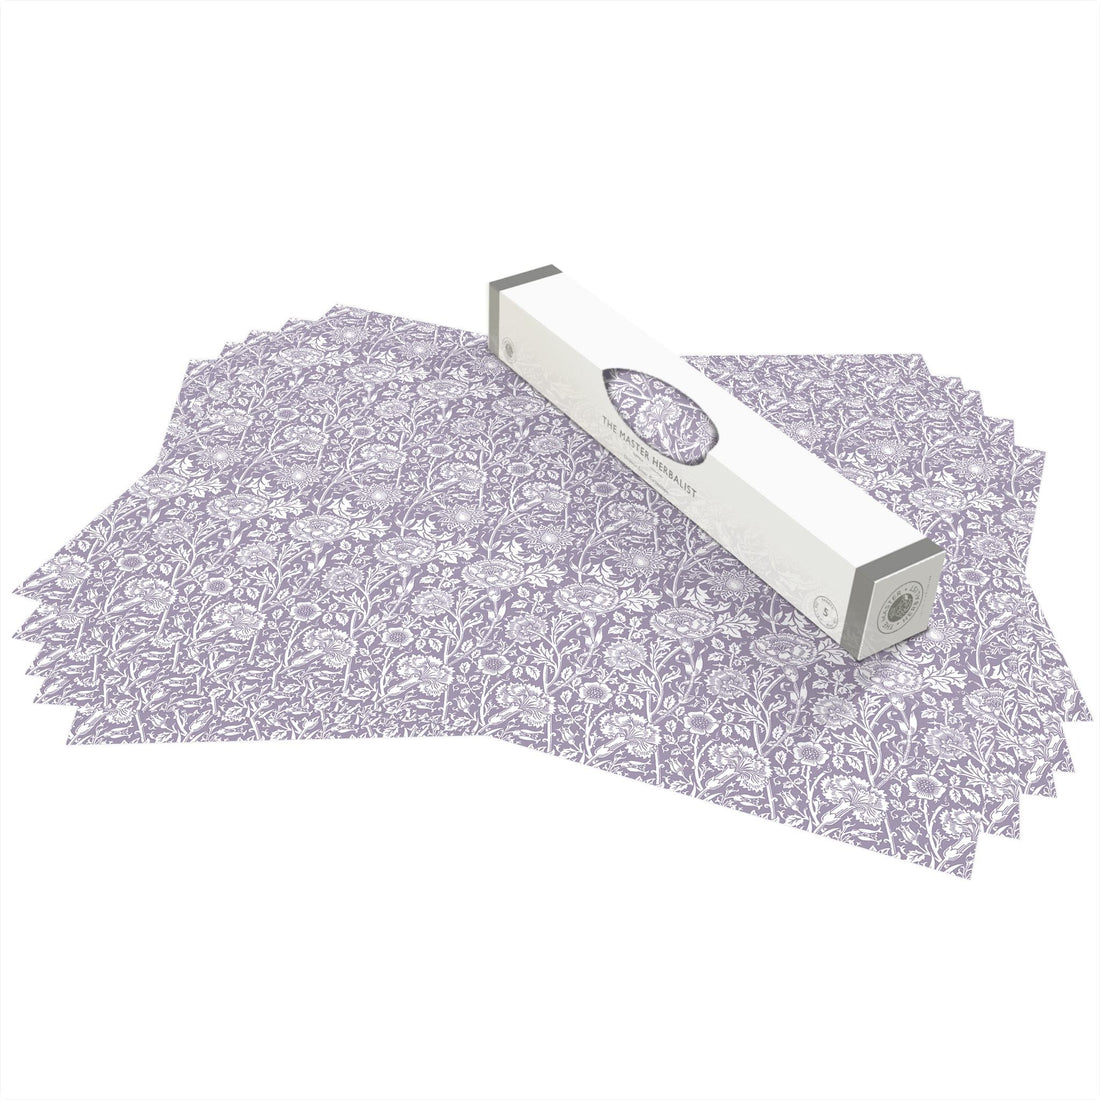 THE MASTER HERBALIST LILAC fragrance SCENTED Drawer Liners in PURPLE William Morris Design. Made in Britain.